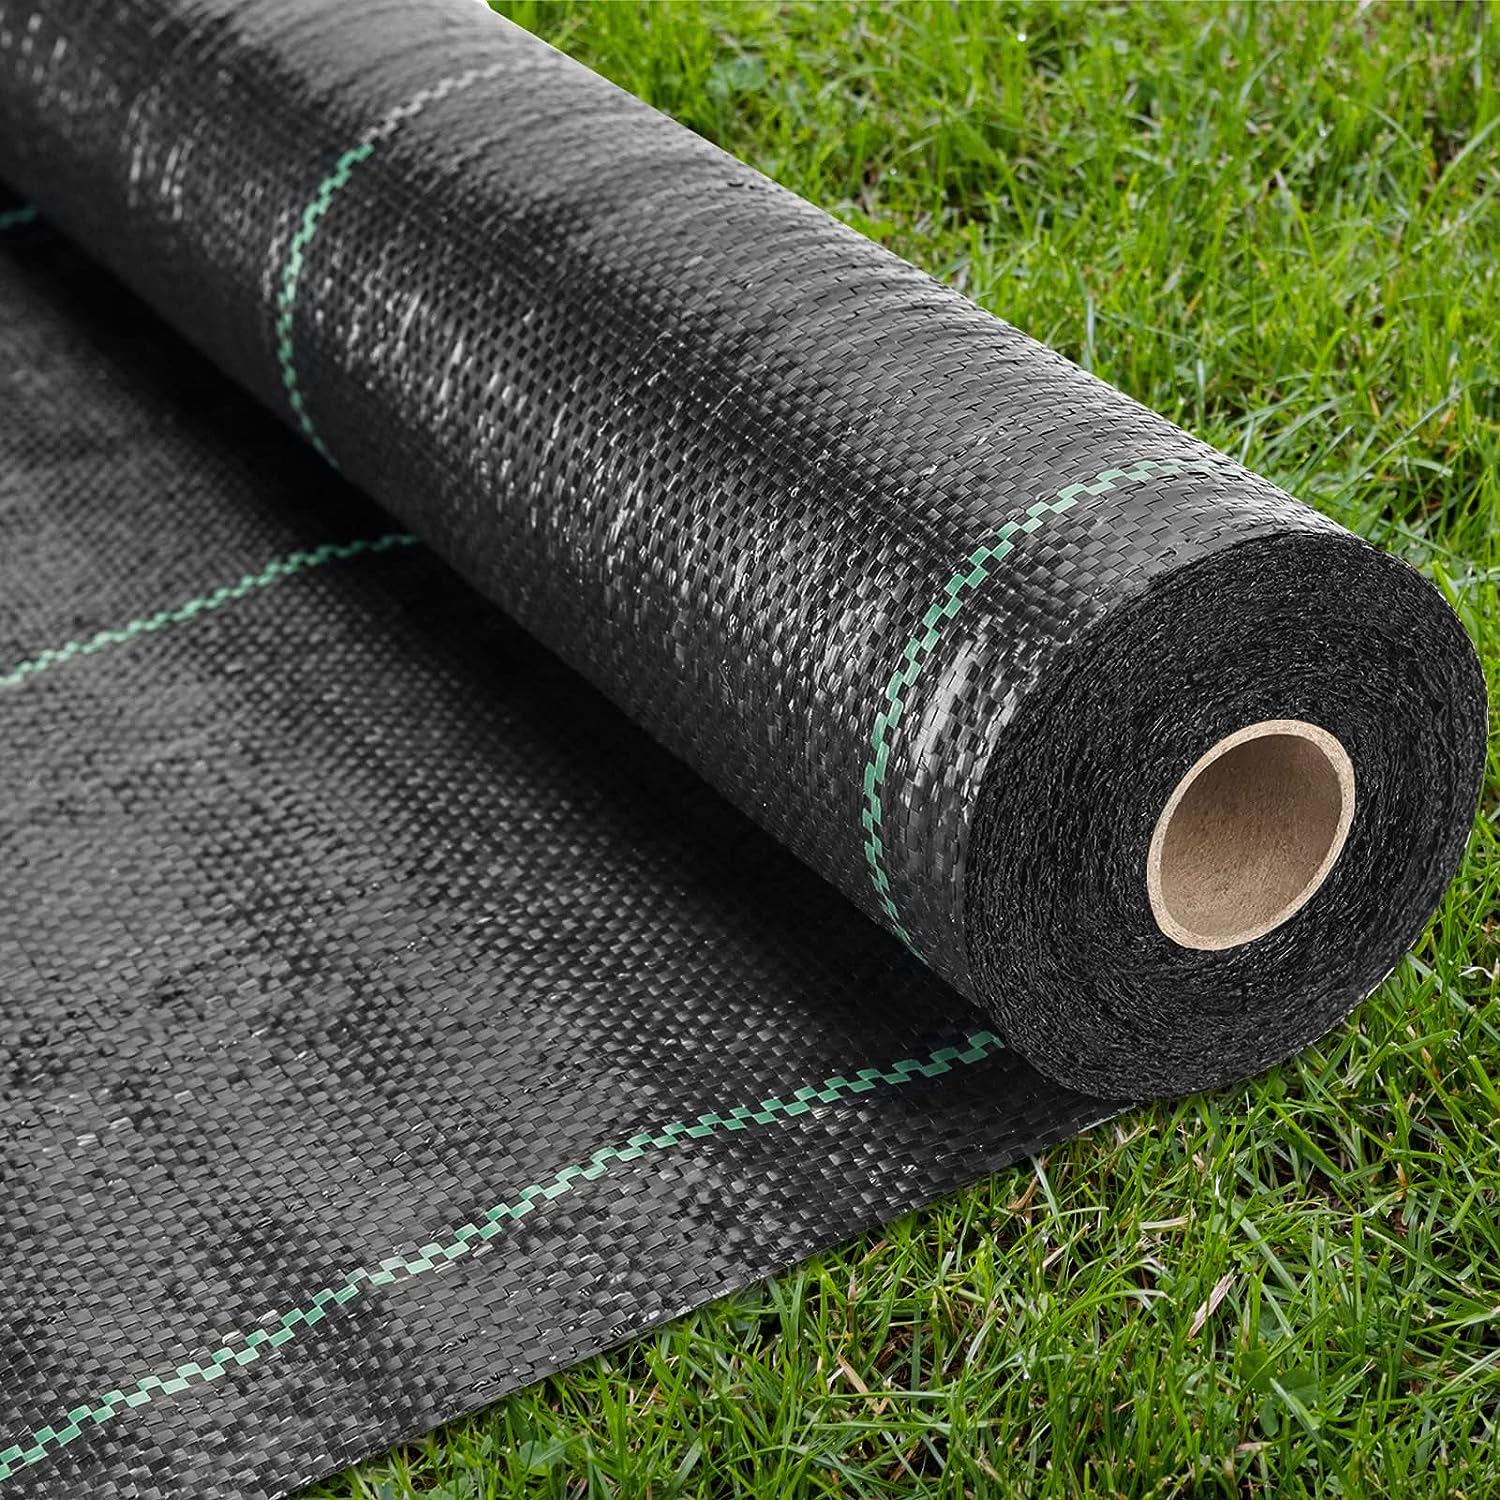 ZJIA 4ft x 100 ft Weed Barrier Landscape Fabric Heavy [...]